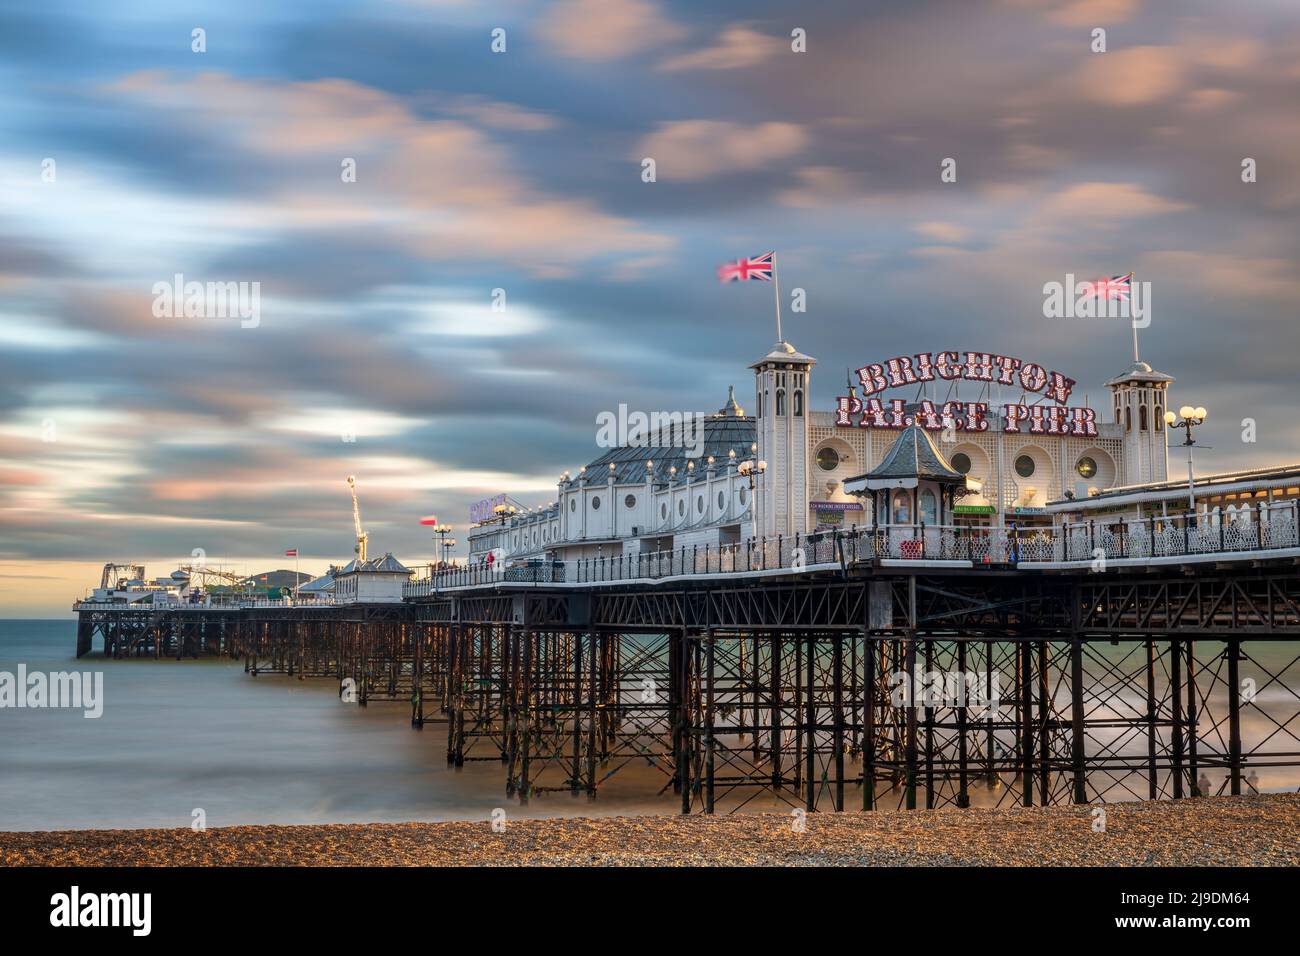 The Brighton Palace Pier, also known as Brighton Pier or Palace Pier, is a Grade II listed pleasure pier in Brighton and is the only one of three pier Stock Photo